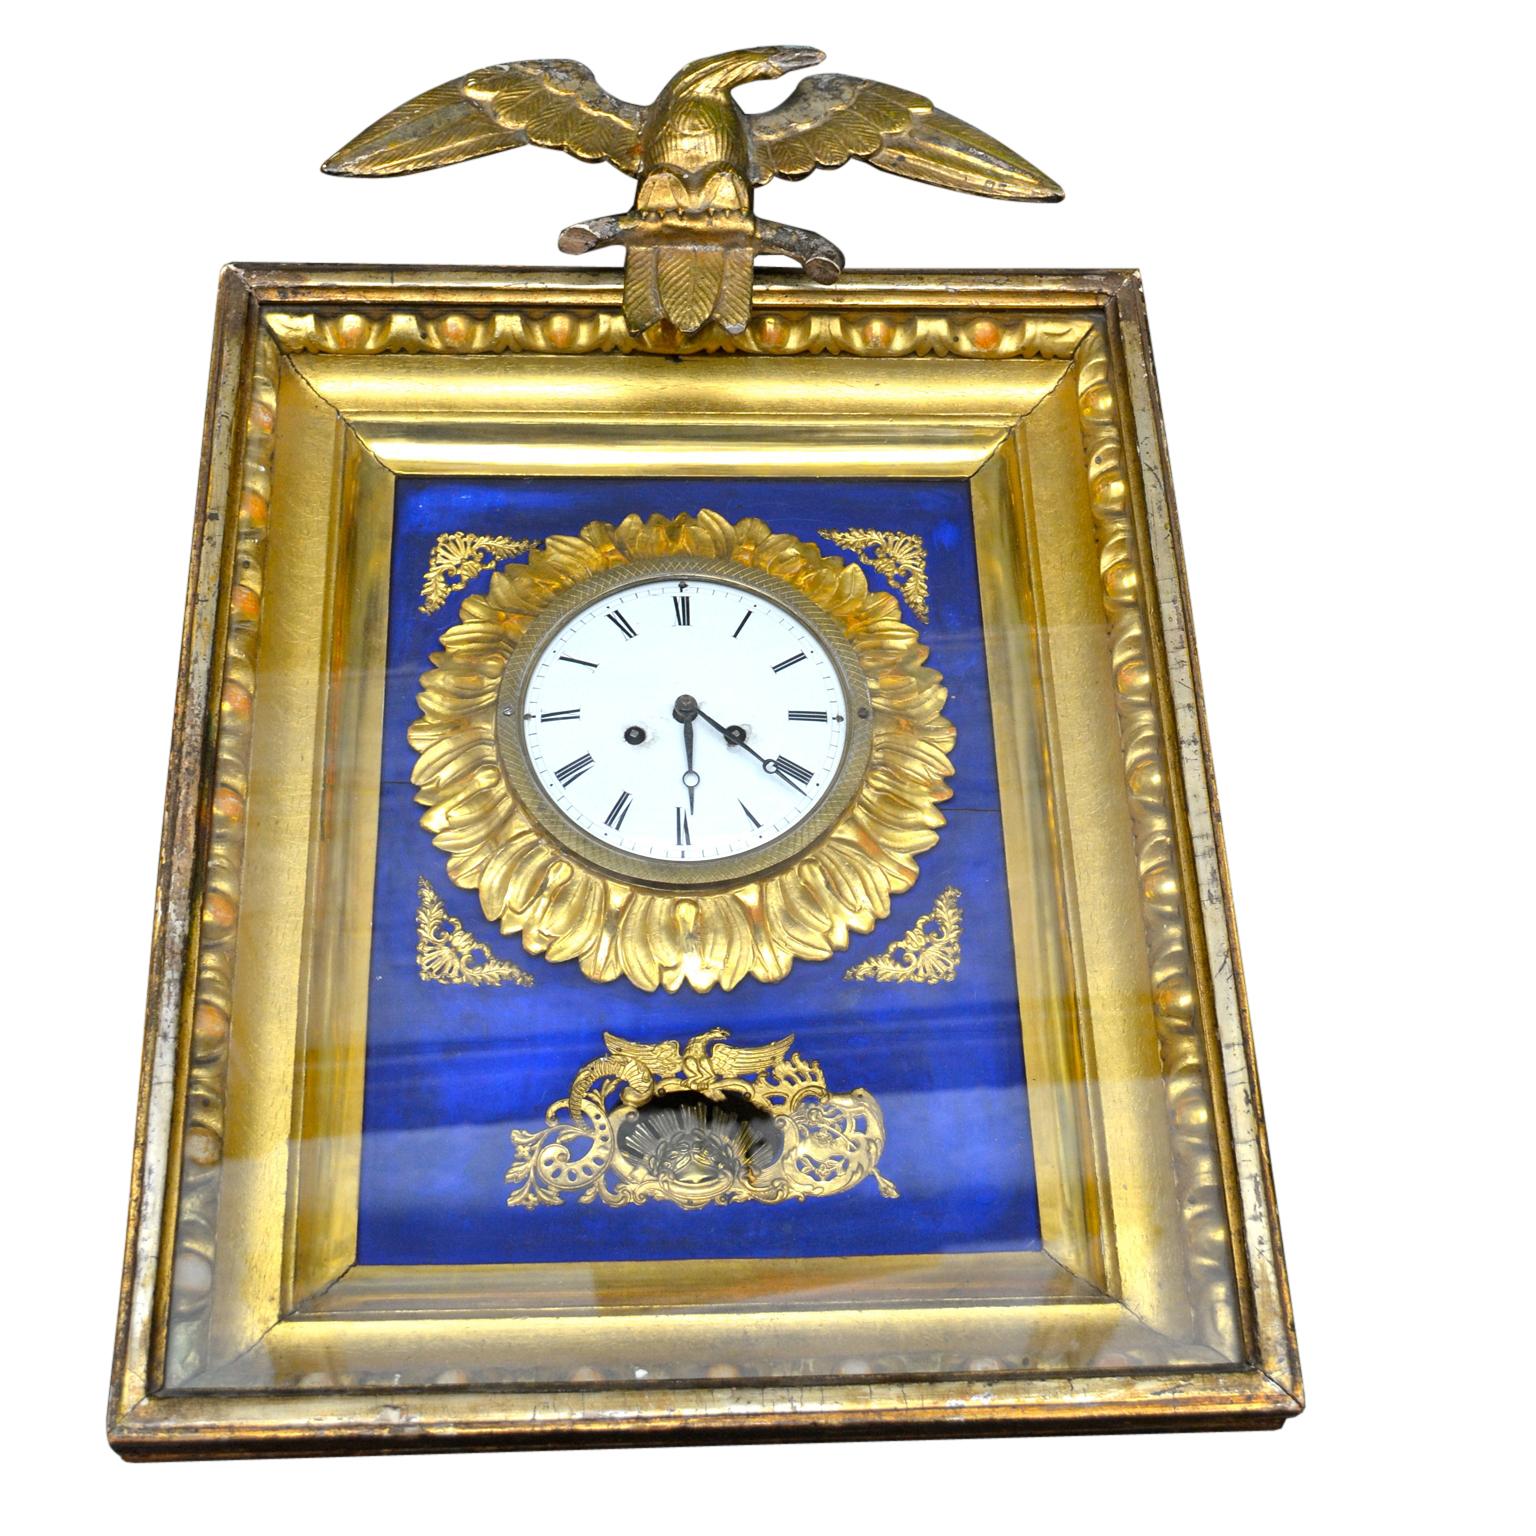 A traditional Austrian Biedermeier wall clock featuring a rectangular carved and gilded wood frame clock face; surmounted by a gilt bronze winged eagle. The decorations on the frame are of gilded metal with gilded carved wood around the dial. The